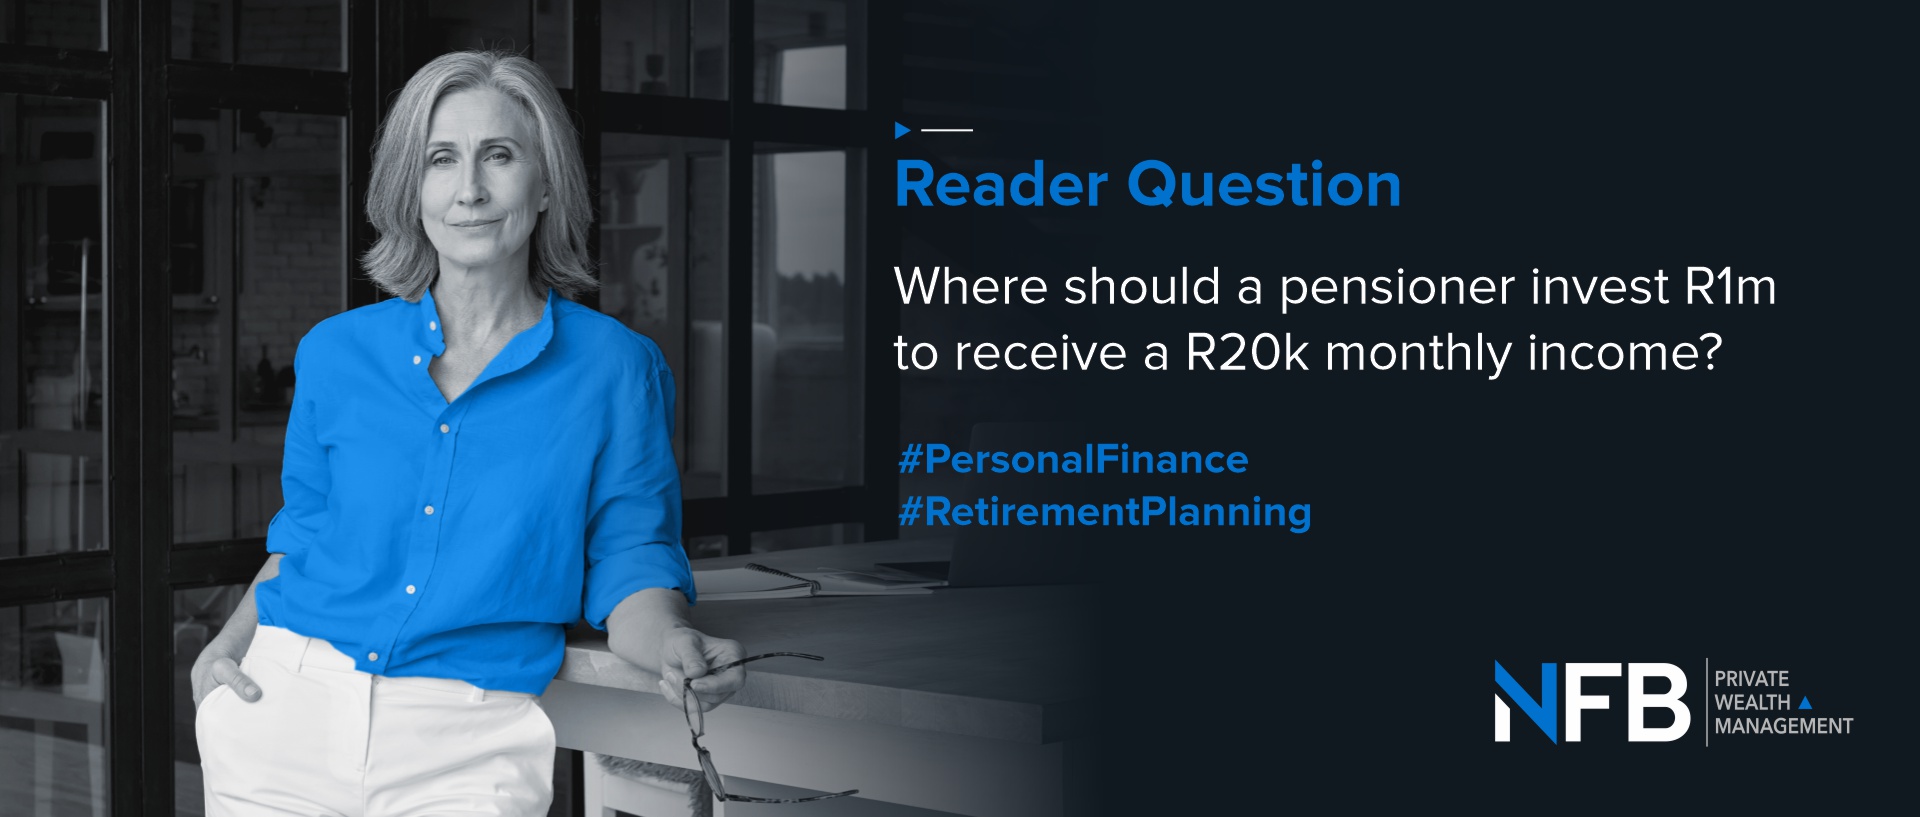 Where should a pensioner invest R1m to receive a R20k monthly income?